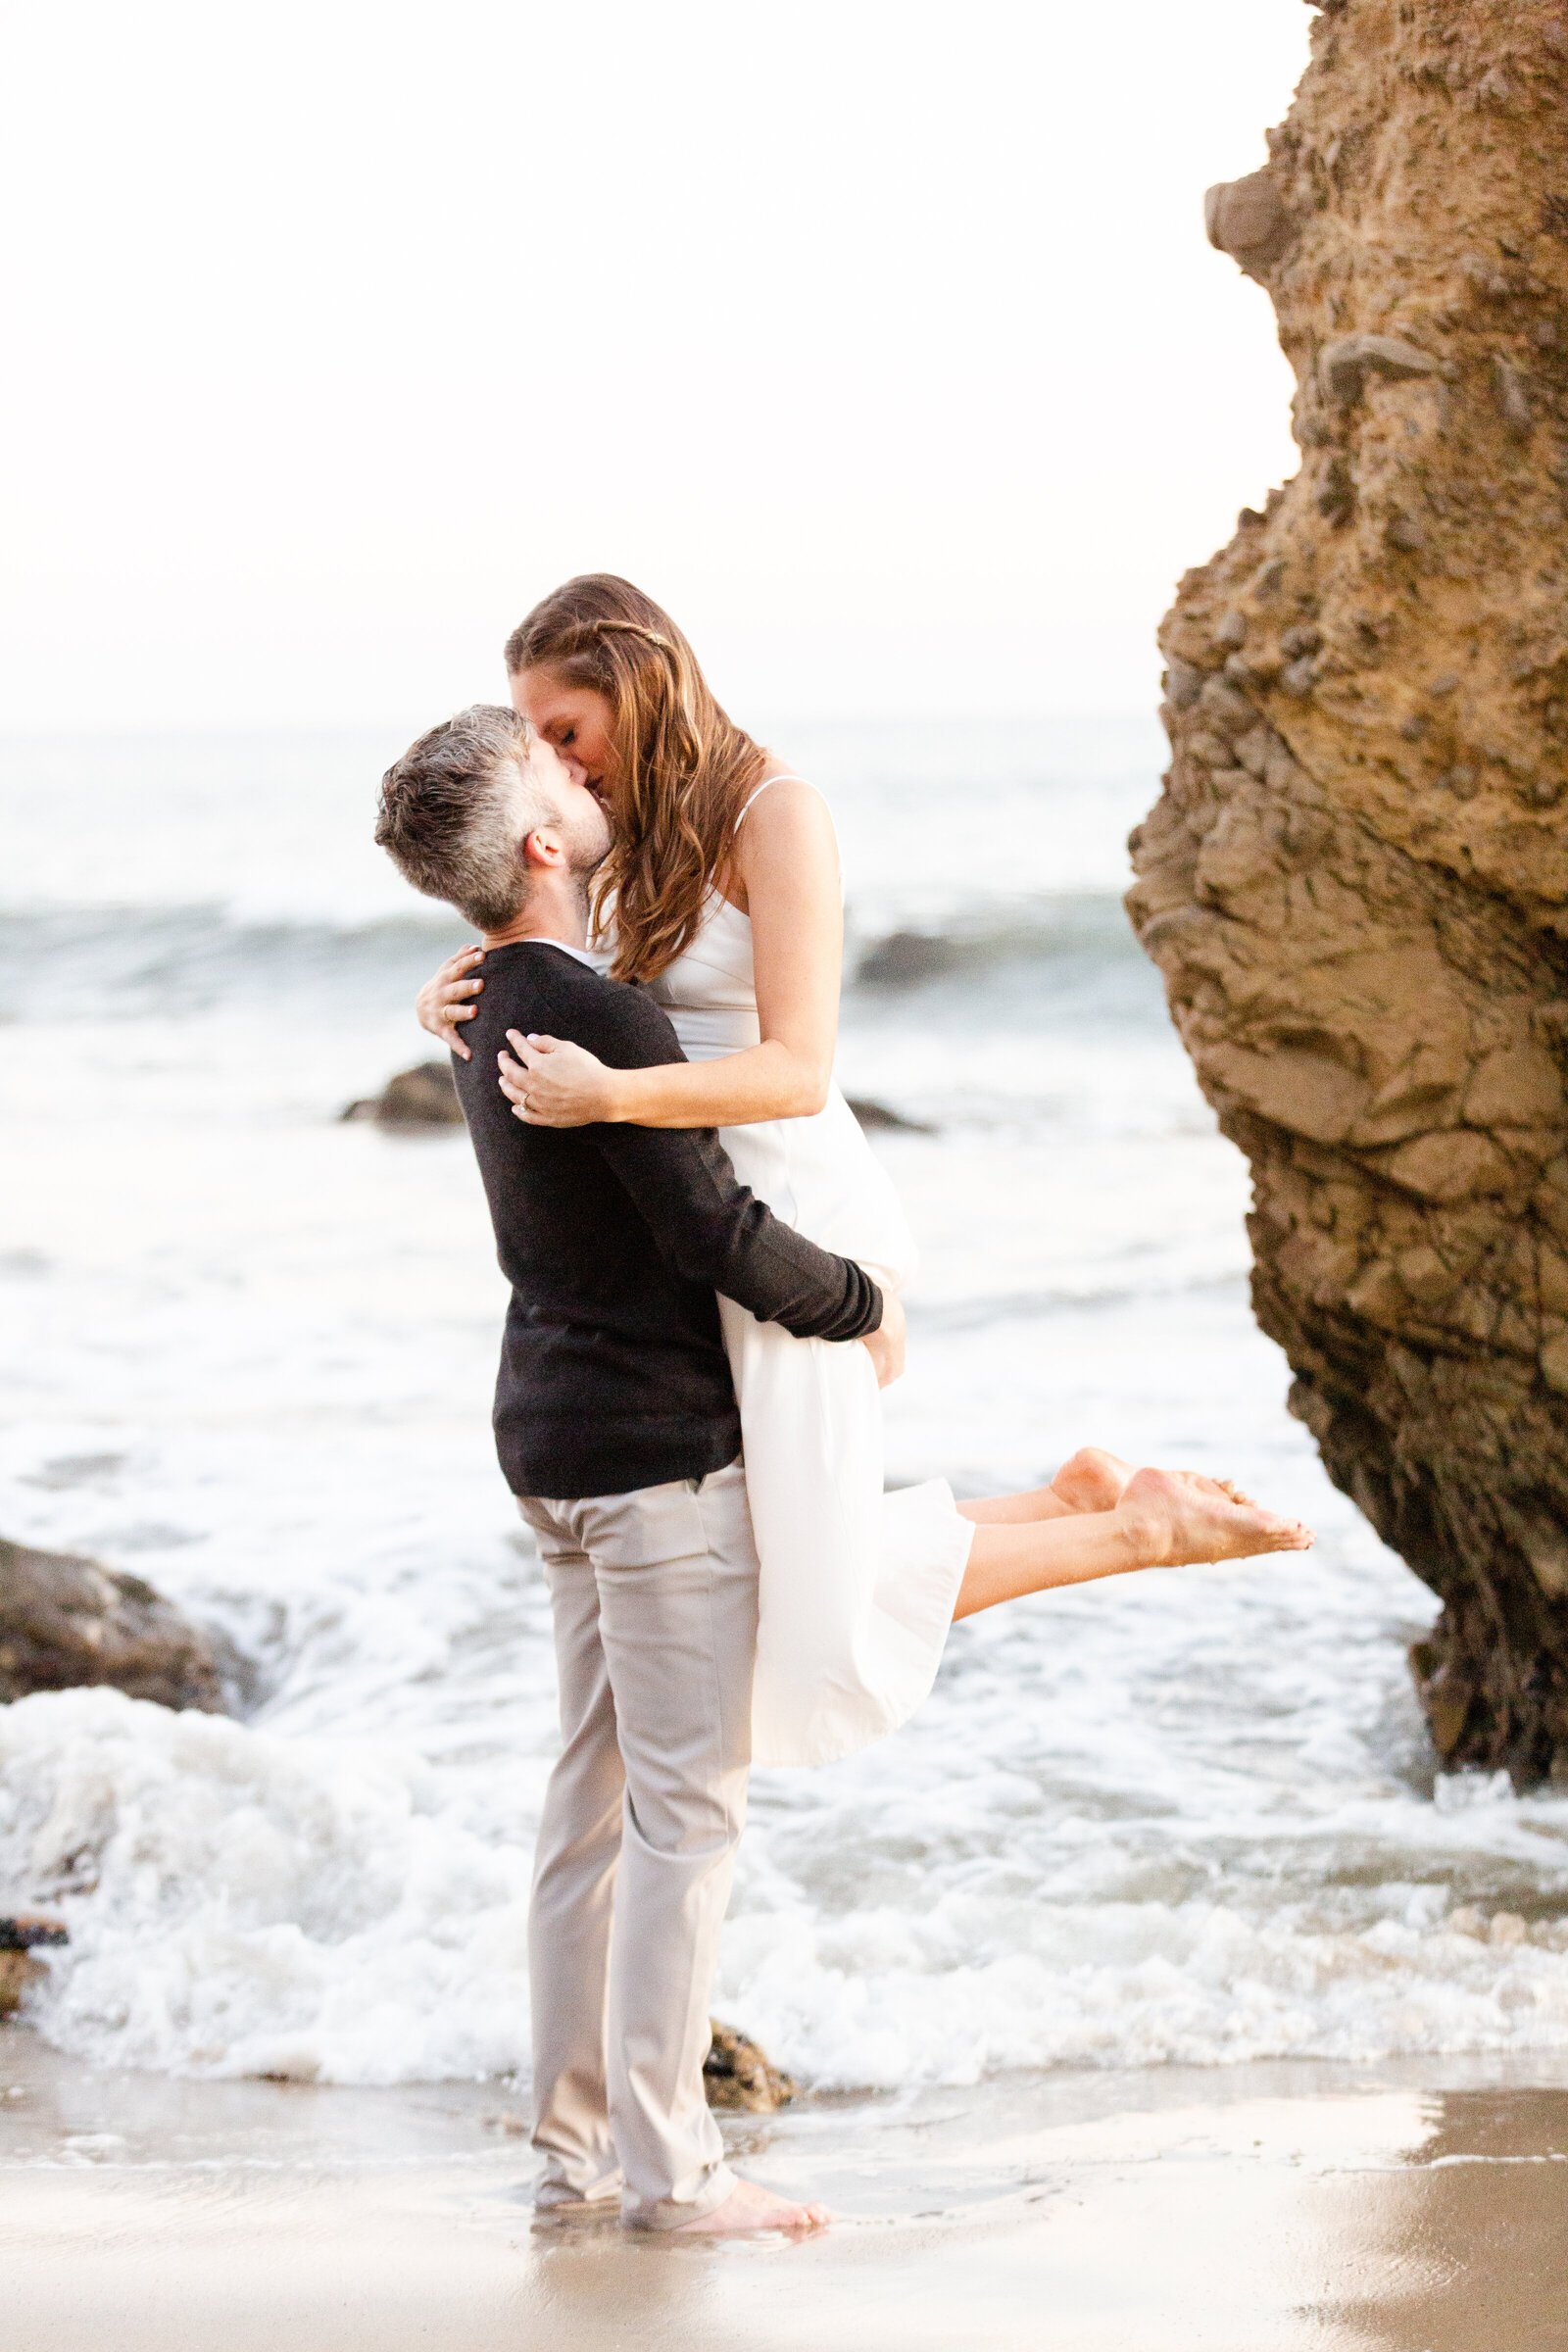 Destination engagement session taken by husband and wife wedding photographers